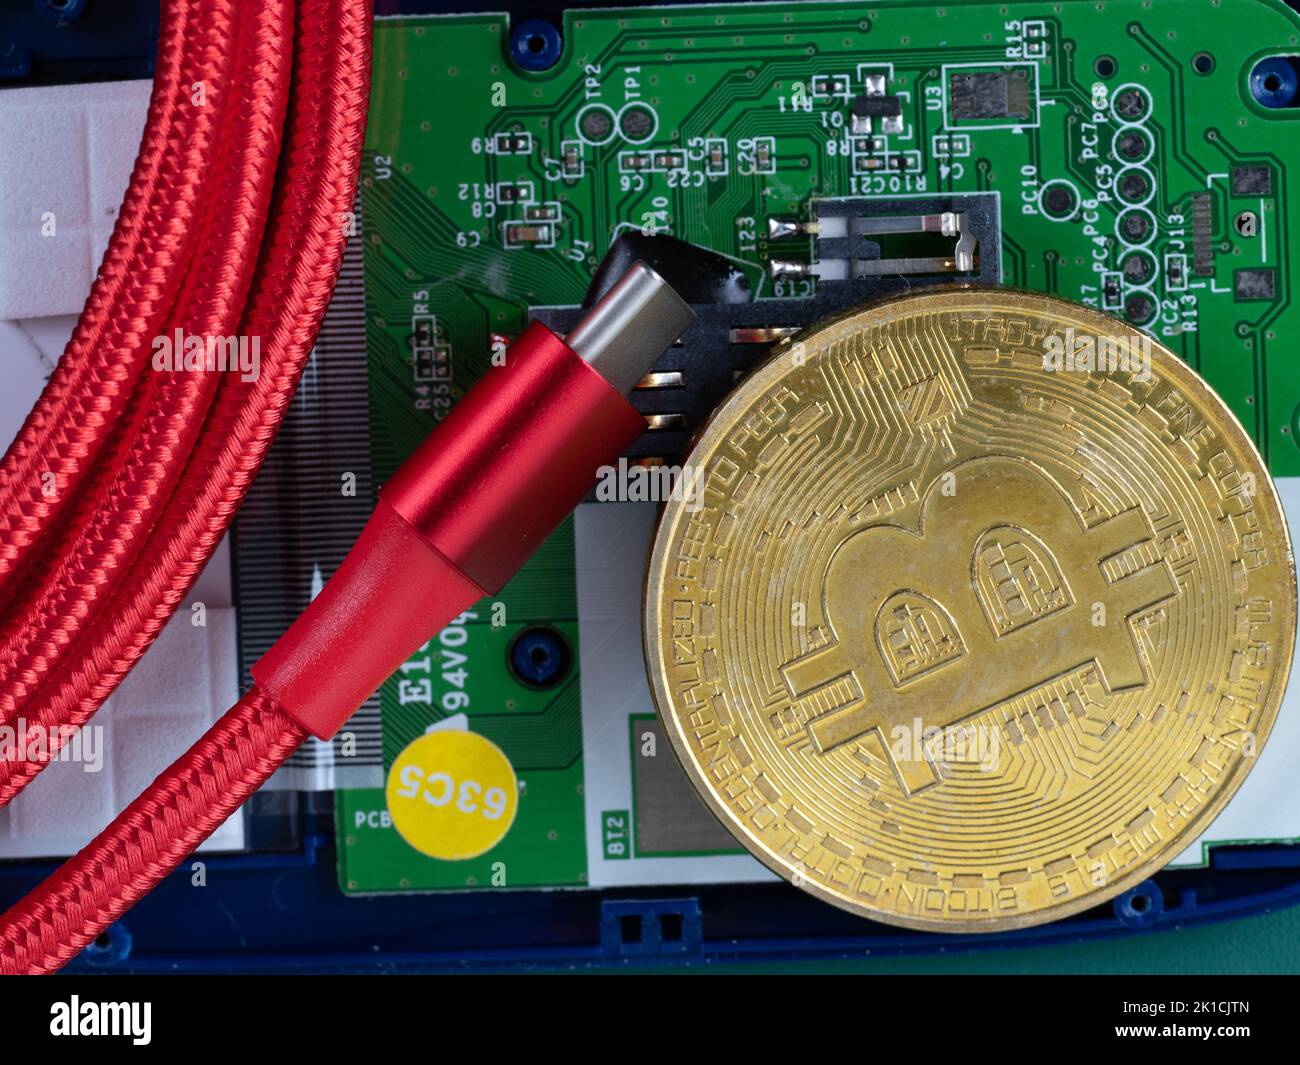 on a printed circuit board and red USB trpe C cable Stock Photo